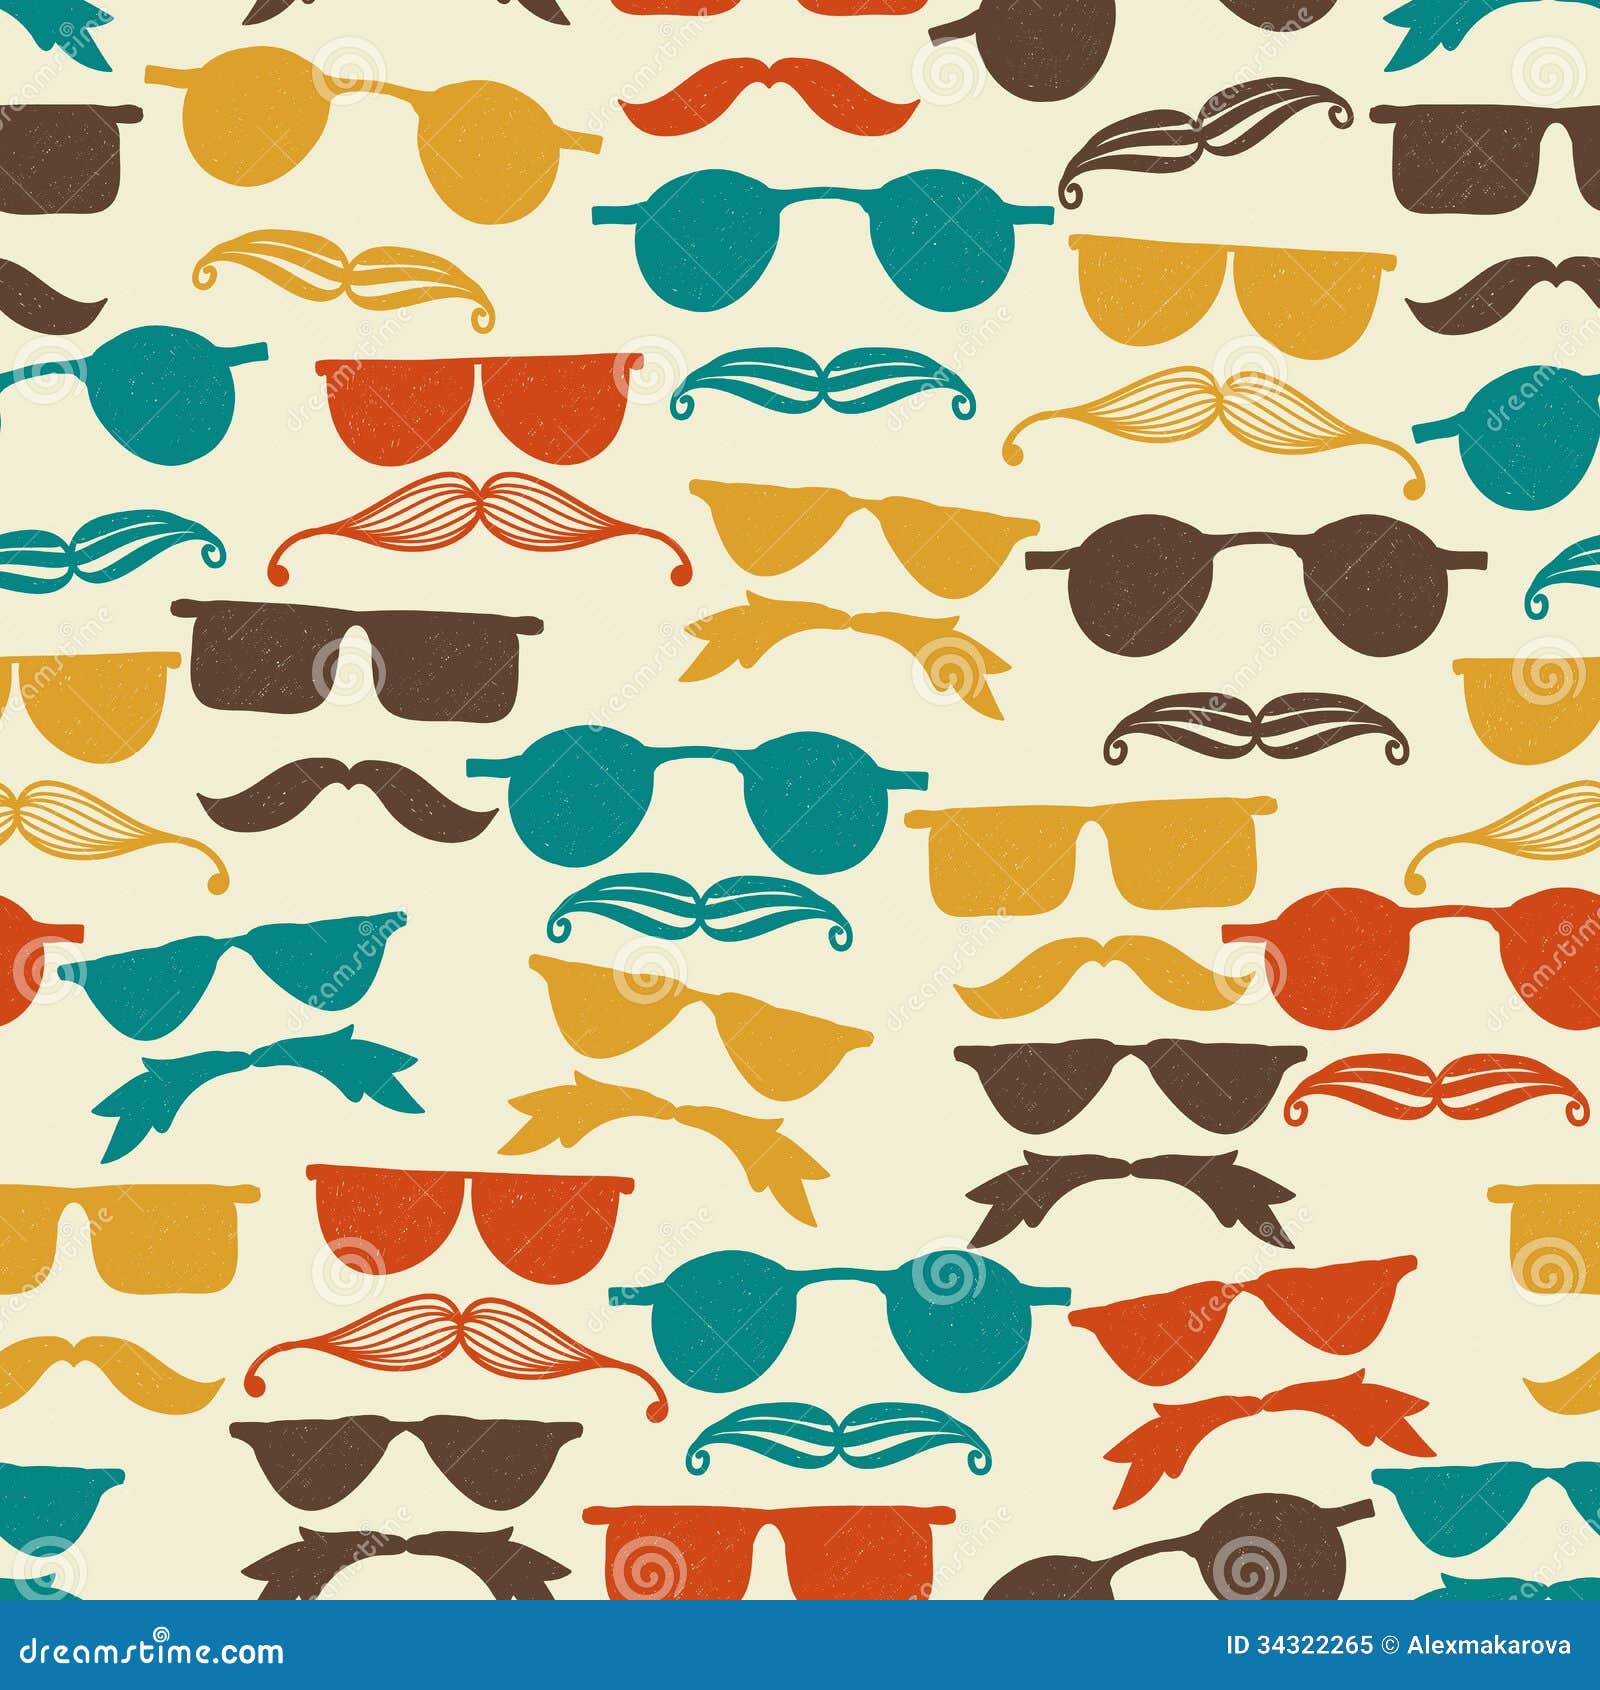 tumblr backgrounds mustache Viewing Hipster  Cool Patterns Gallery